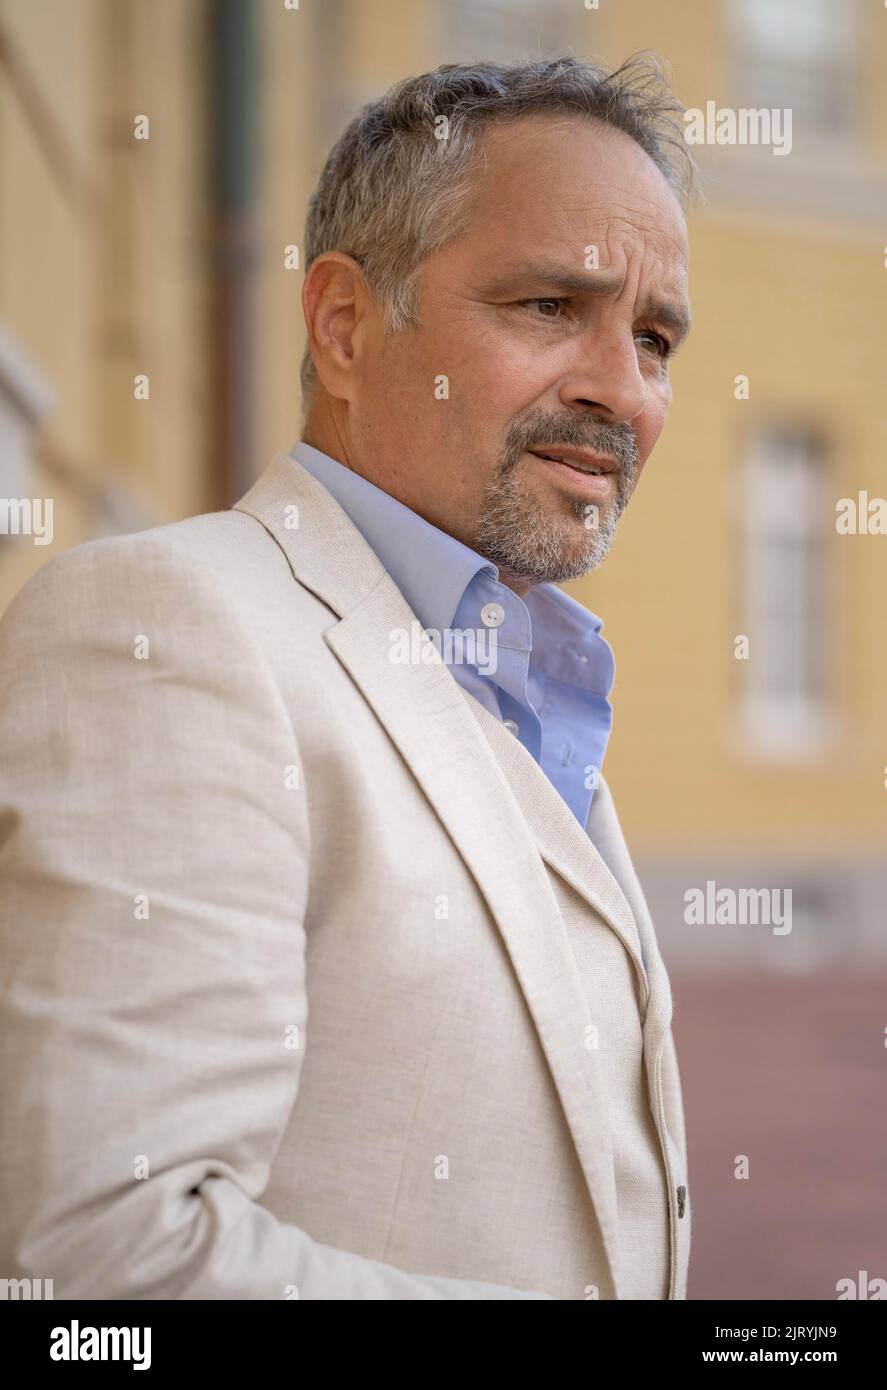 Man in suit looks confused, Karlsruhe, Germany Stock Photo